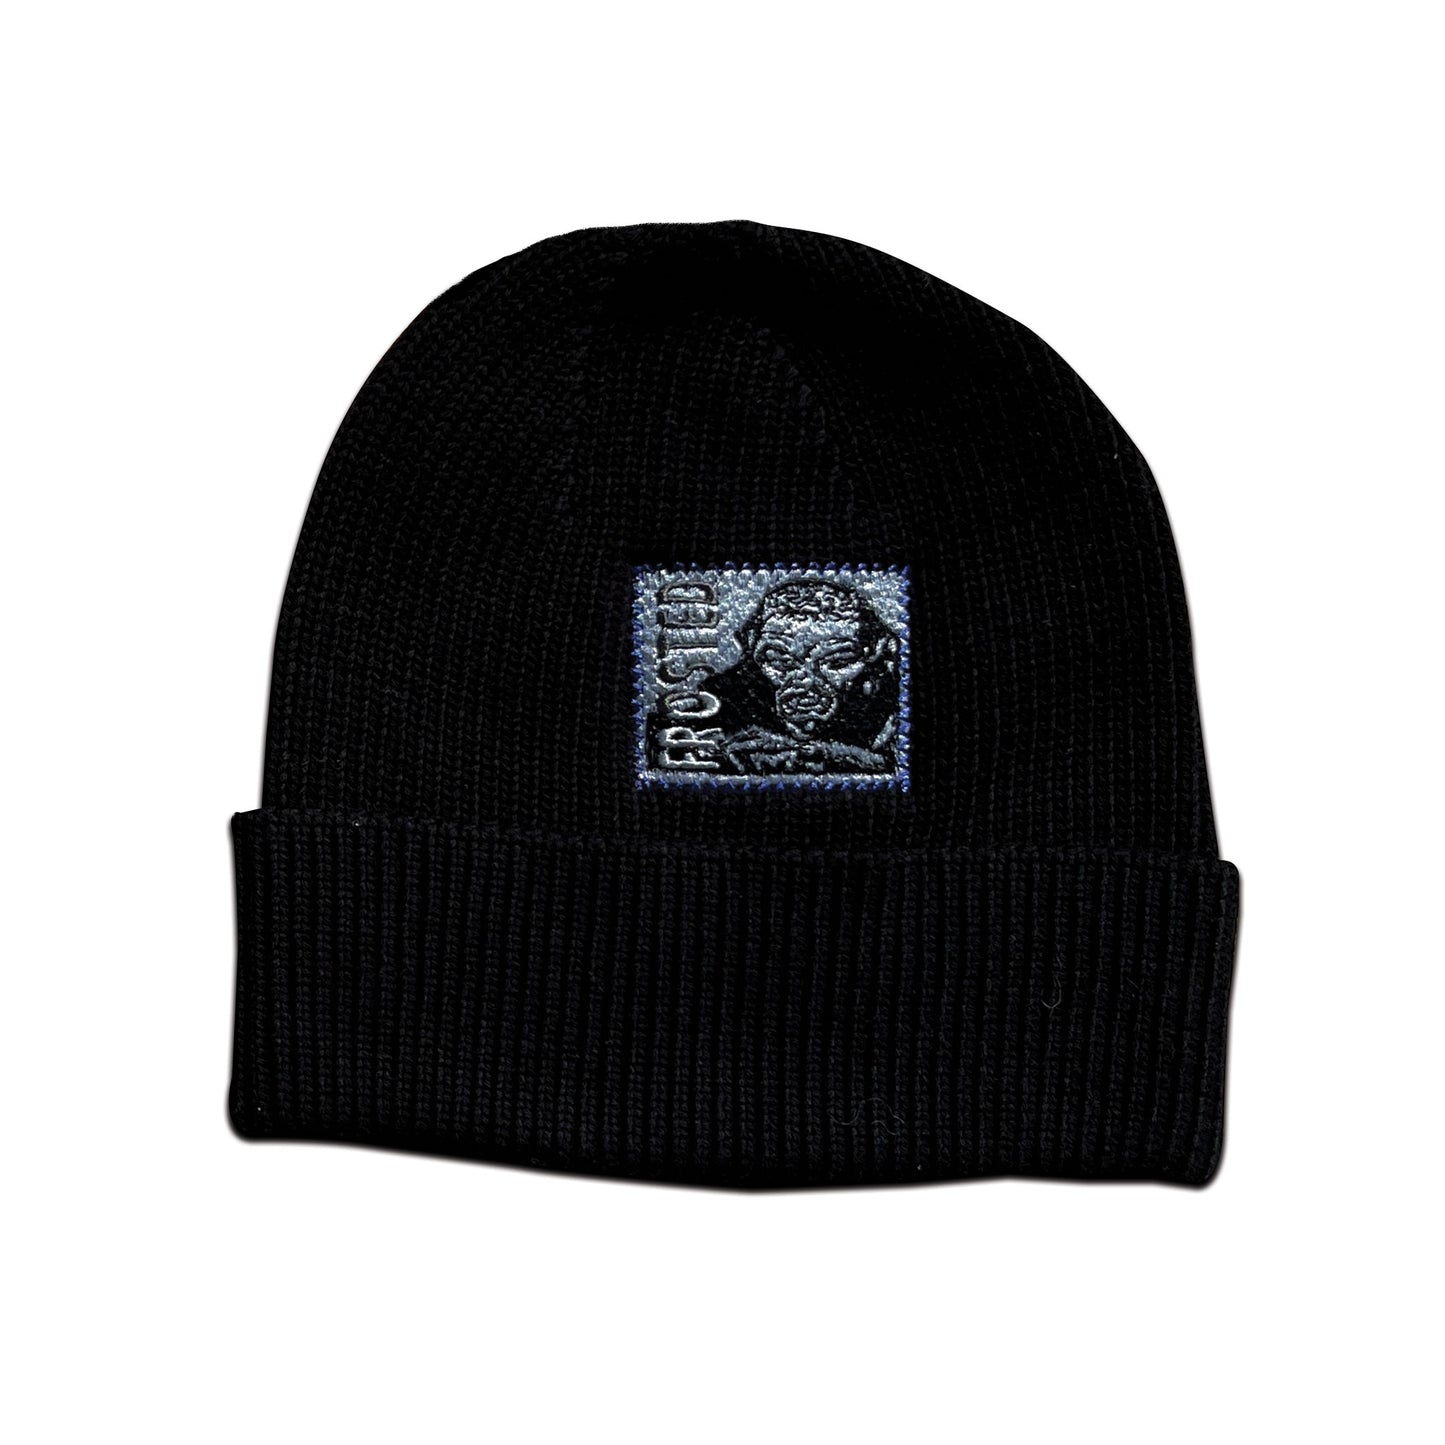 Patched Beanie Black